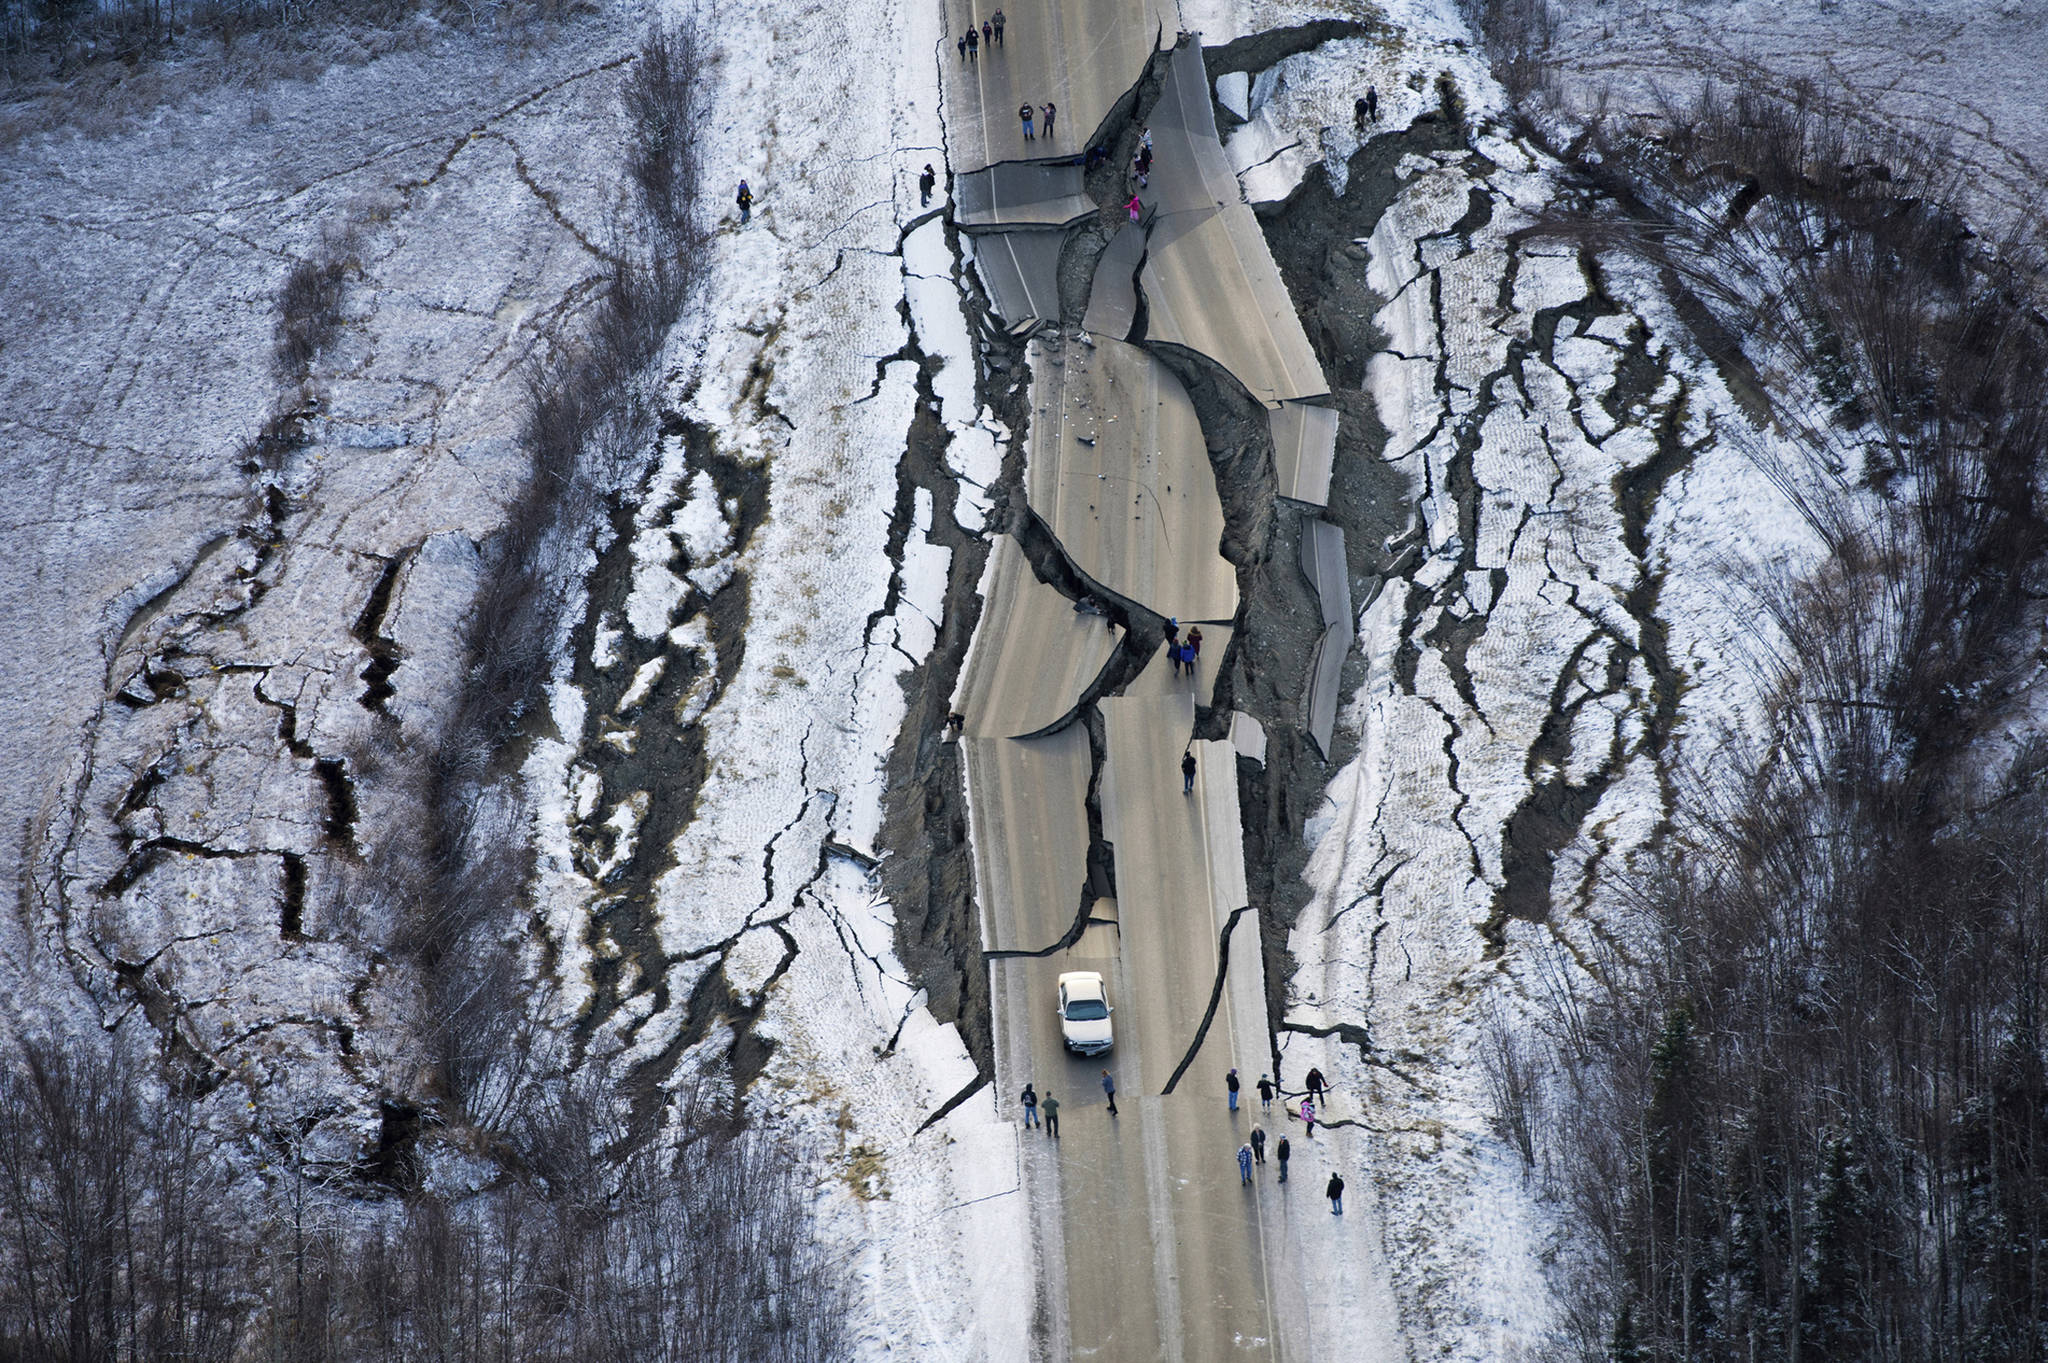 This Nov. 30, 2018 file aerial photo shows earthquake damage on Vine Road, south of Wasilla, Alaska. Alaska State Troopers are asking that people do not take selfies in front of the buckled roadway north of Anchorage, Alaska. (Marc Lester/Anchorage Daily News via AP)